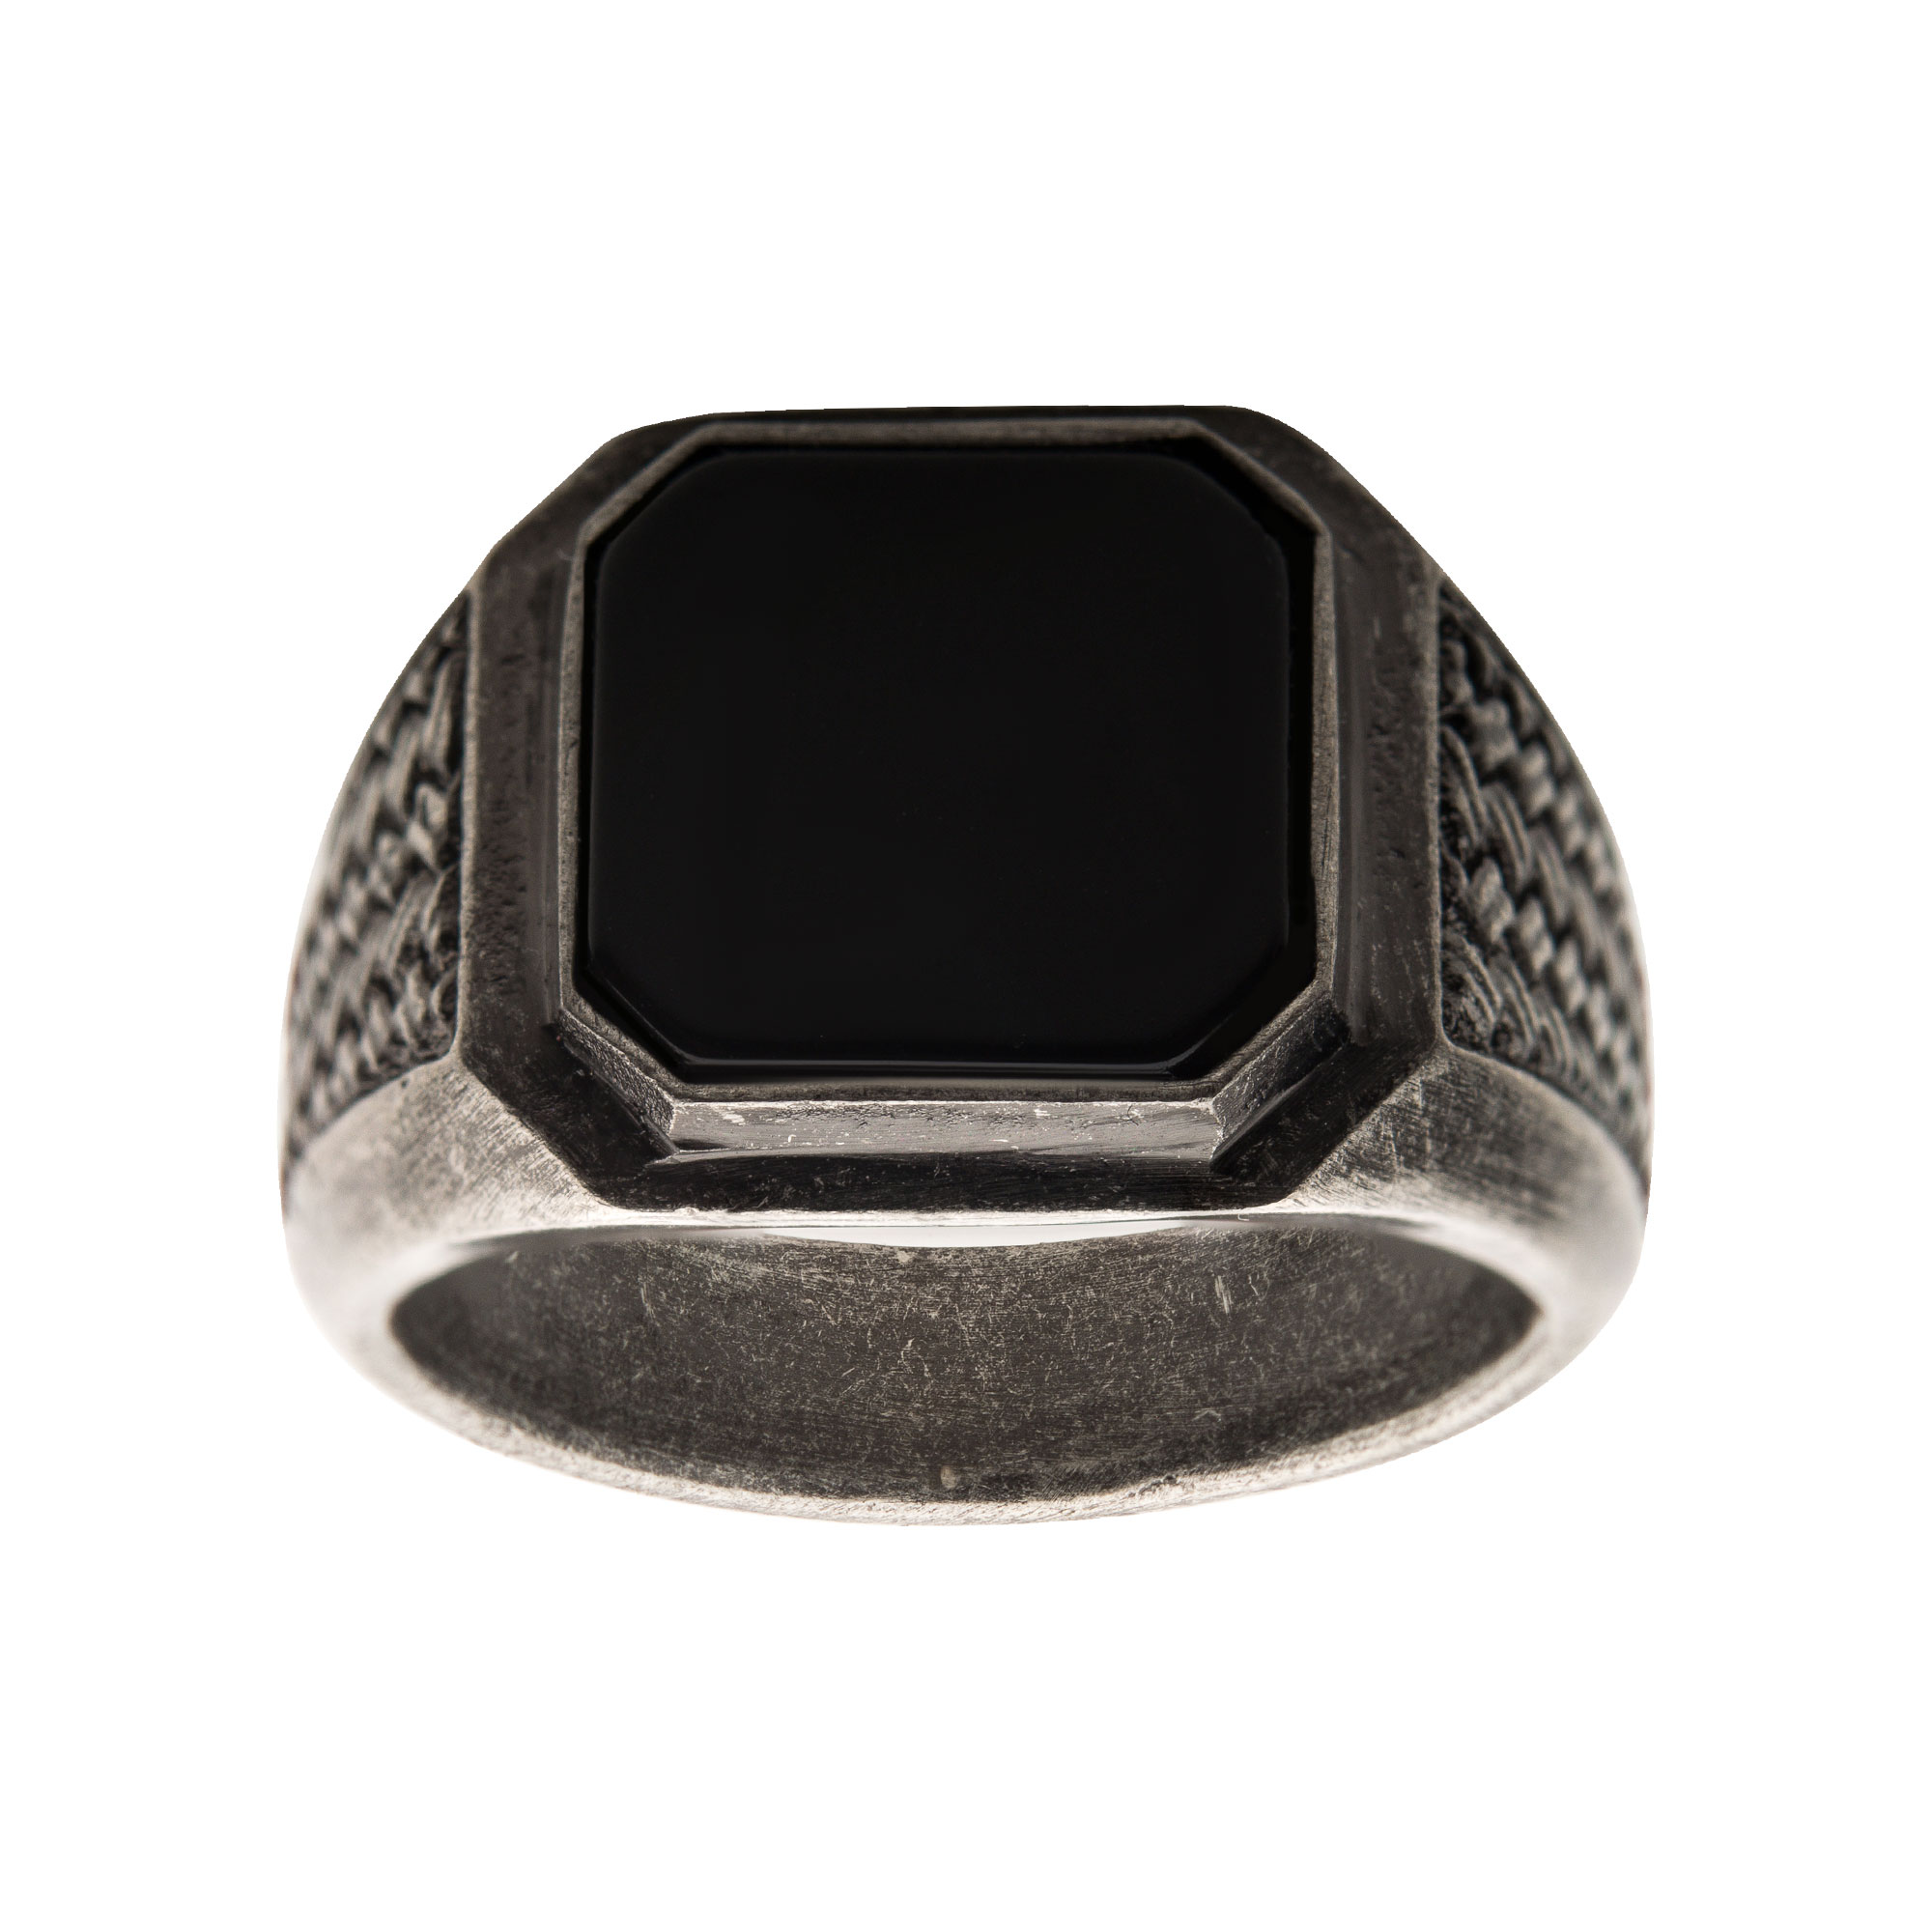 Stainless Steel Silver Plated with Black Agate Stone Ring Image 2 Enchanted Jewelry Plainfield, CT